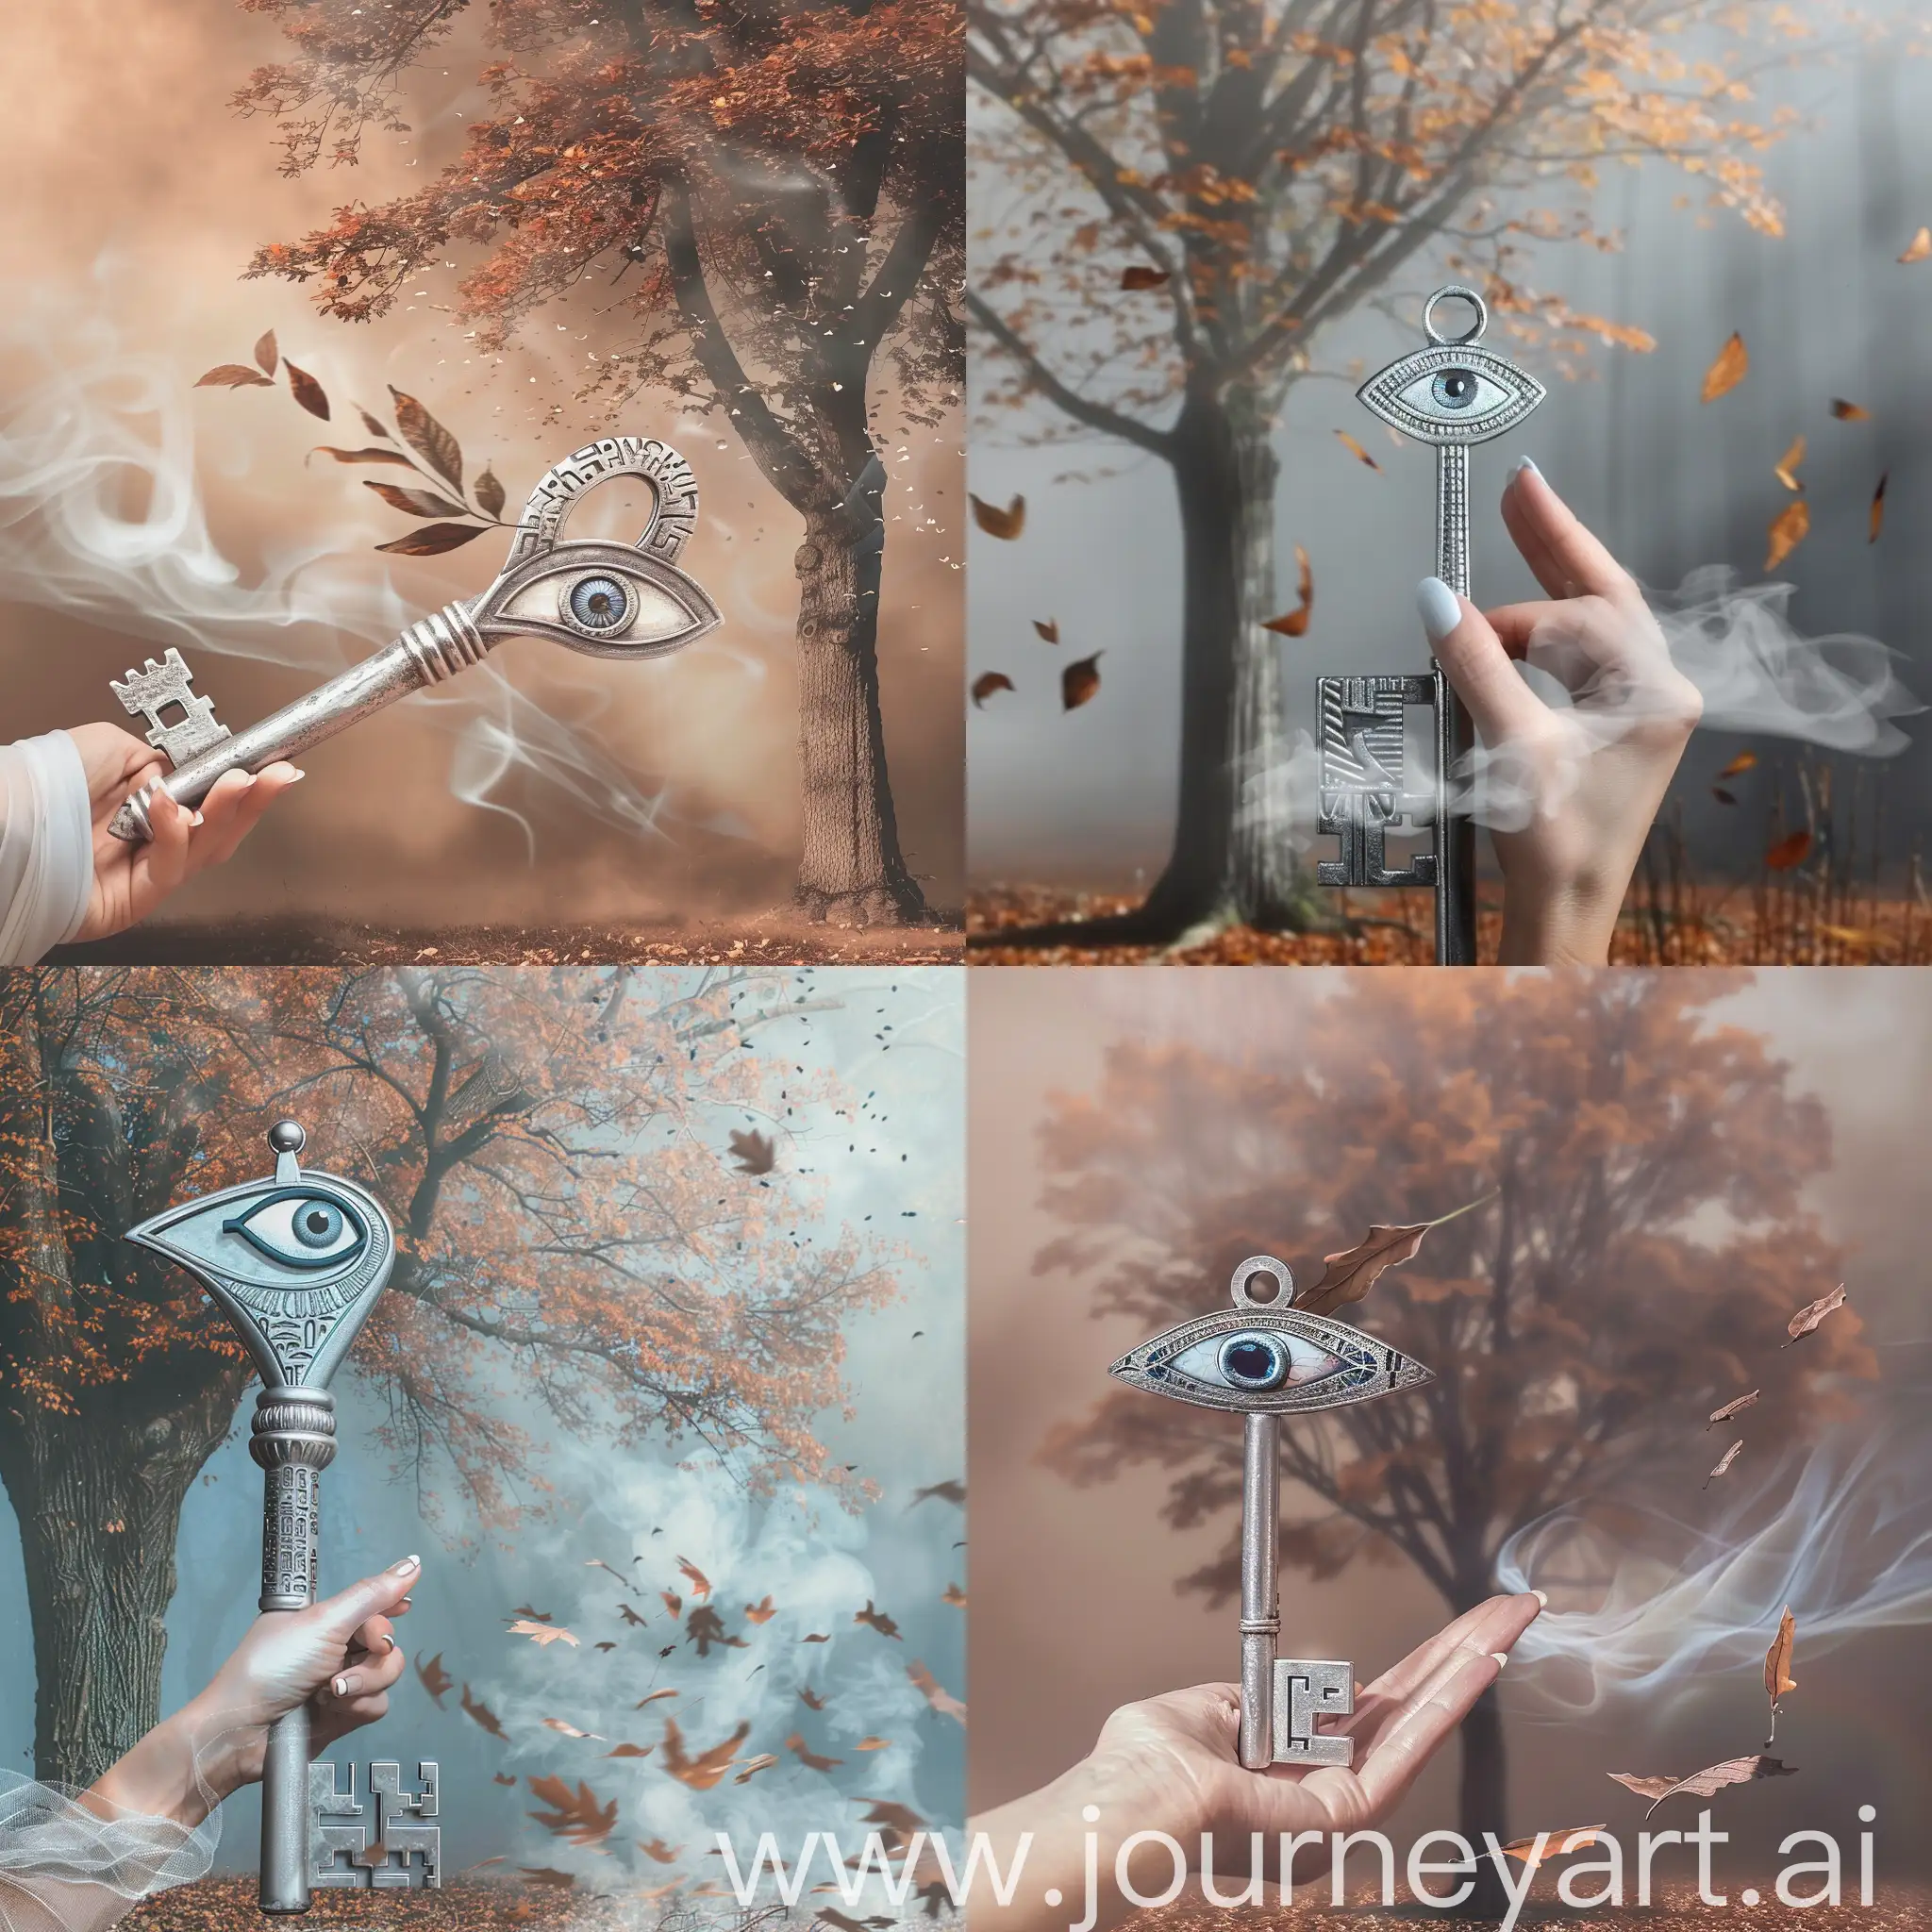 a female hand holding a huge silver key with an egyptian horus eye, mist is floating, in the background there is an oak tree with brown leaves falling off like it is in the autumn